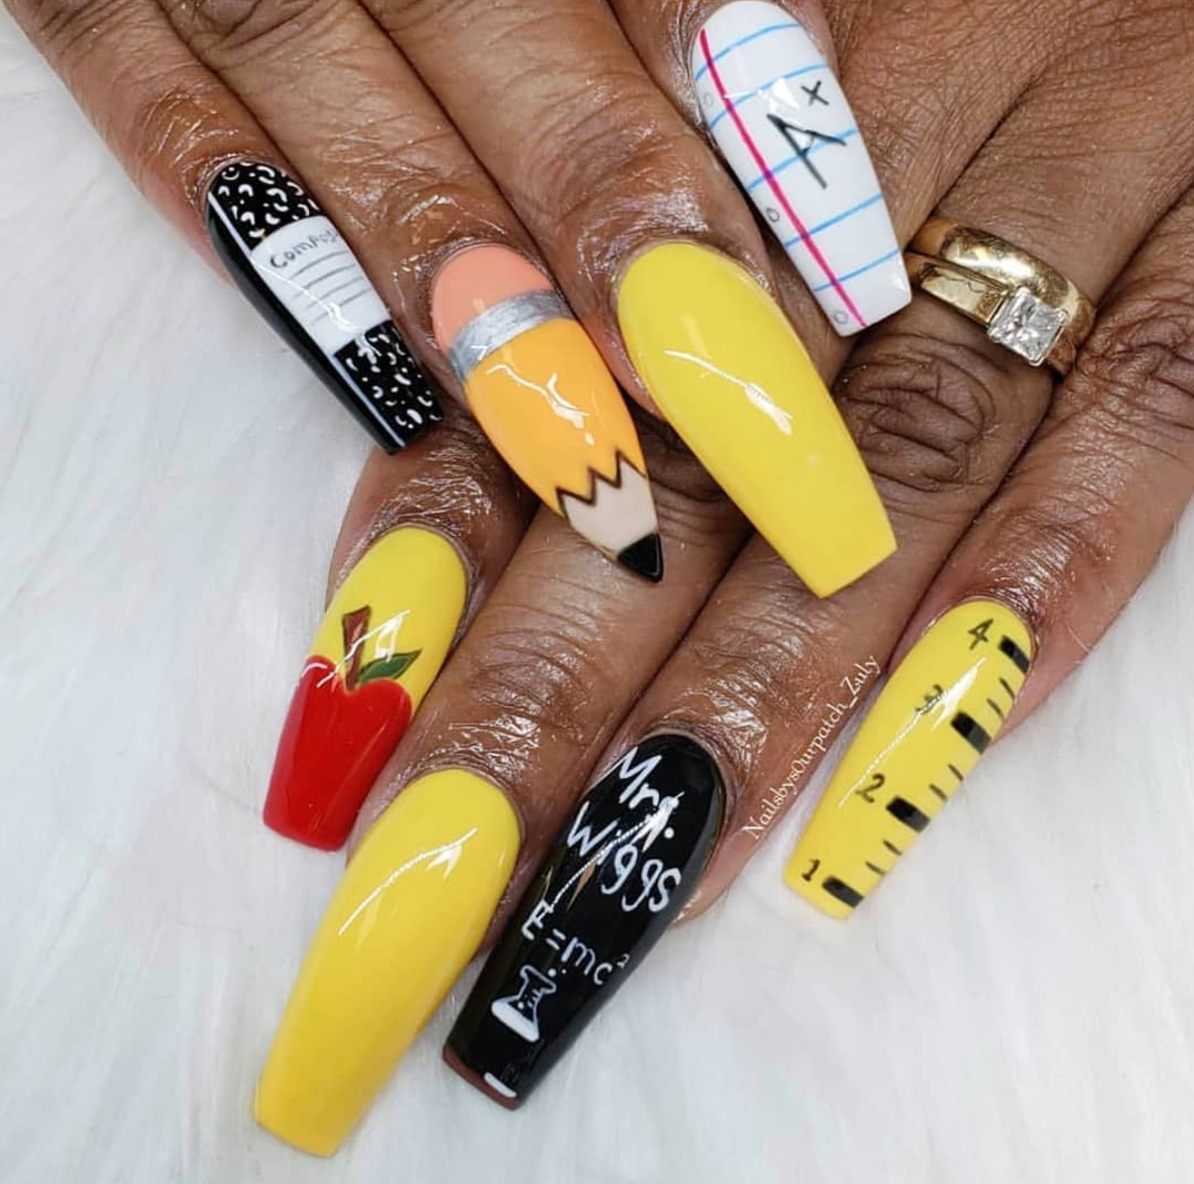 These Fun Nails Bring Creativity To Back-To-School Beauty